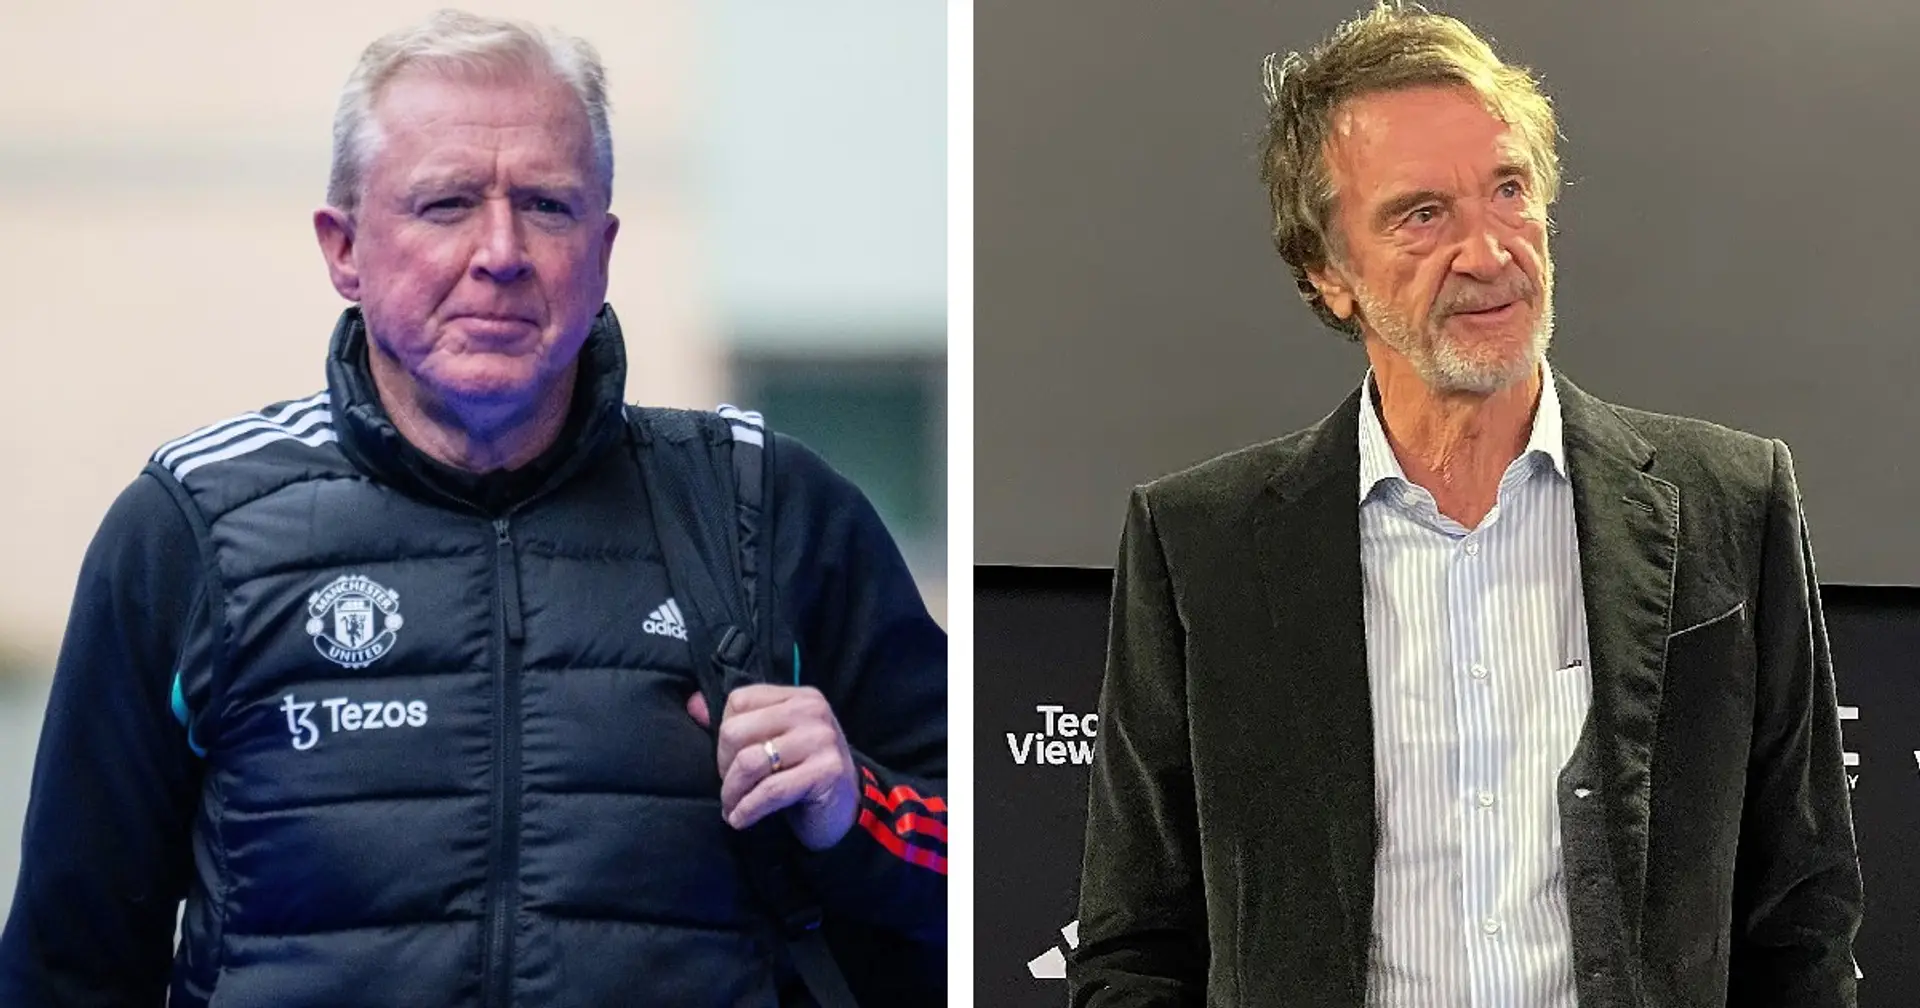 'We have had many storms': Steve McClaren fully backs INEOS to return Man United to former glory